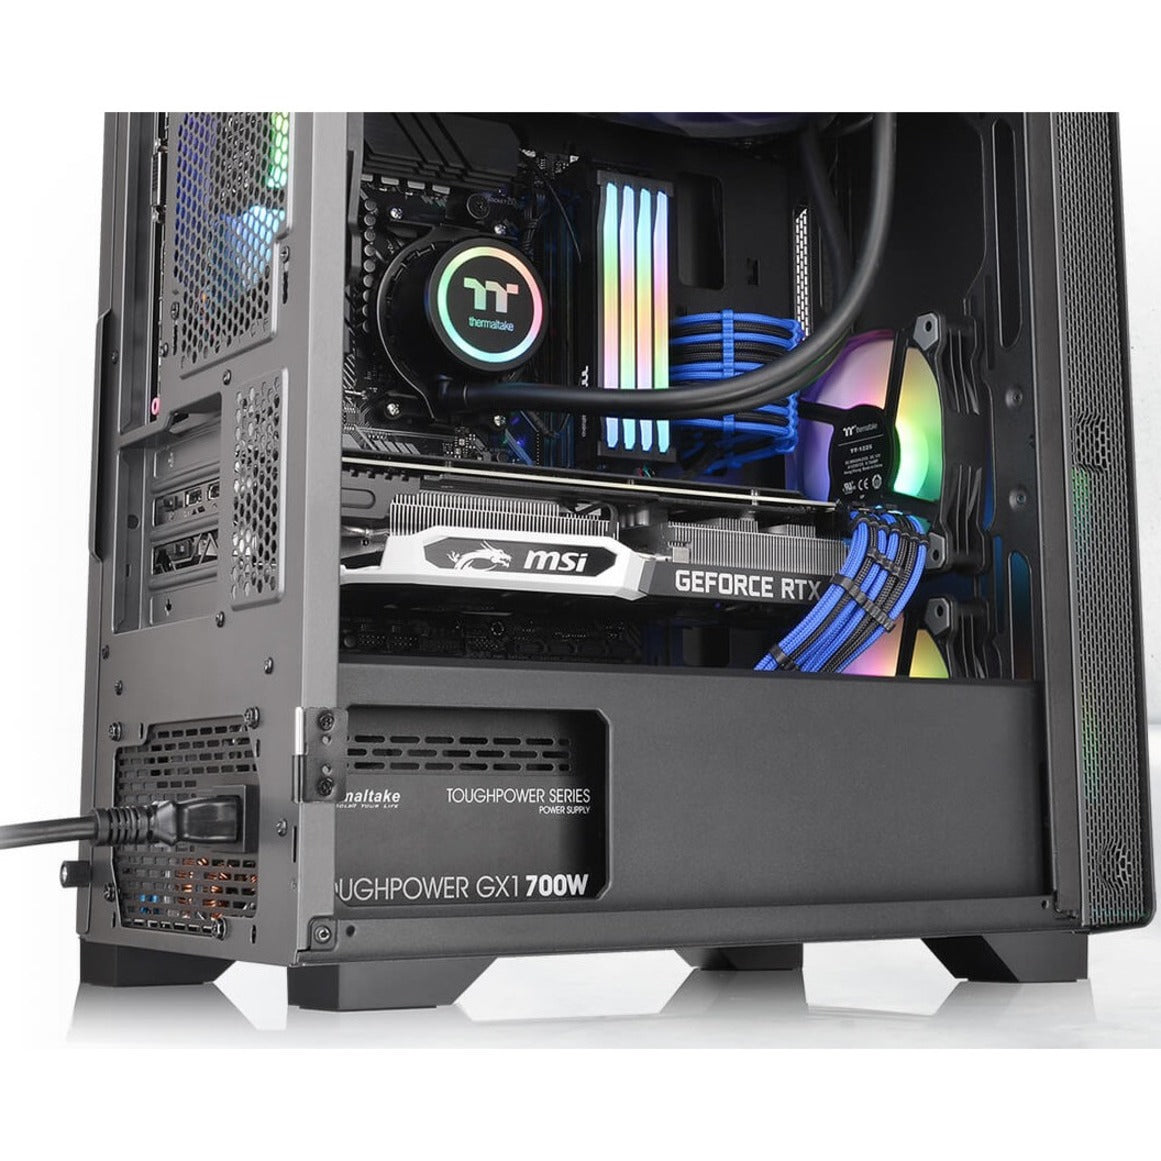 Thermaltake CA-1Q9-00S1WN-00 S100 Tempered Glass Micro Chassis, Compact Design, 2.5" Bays, 4 Expansion Slots, 3 USB Ports